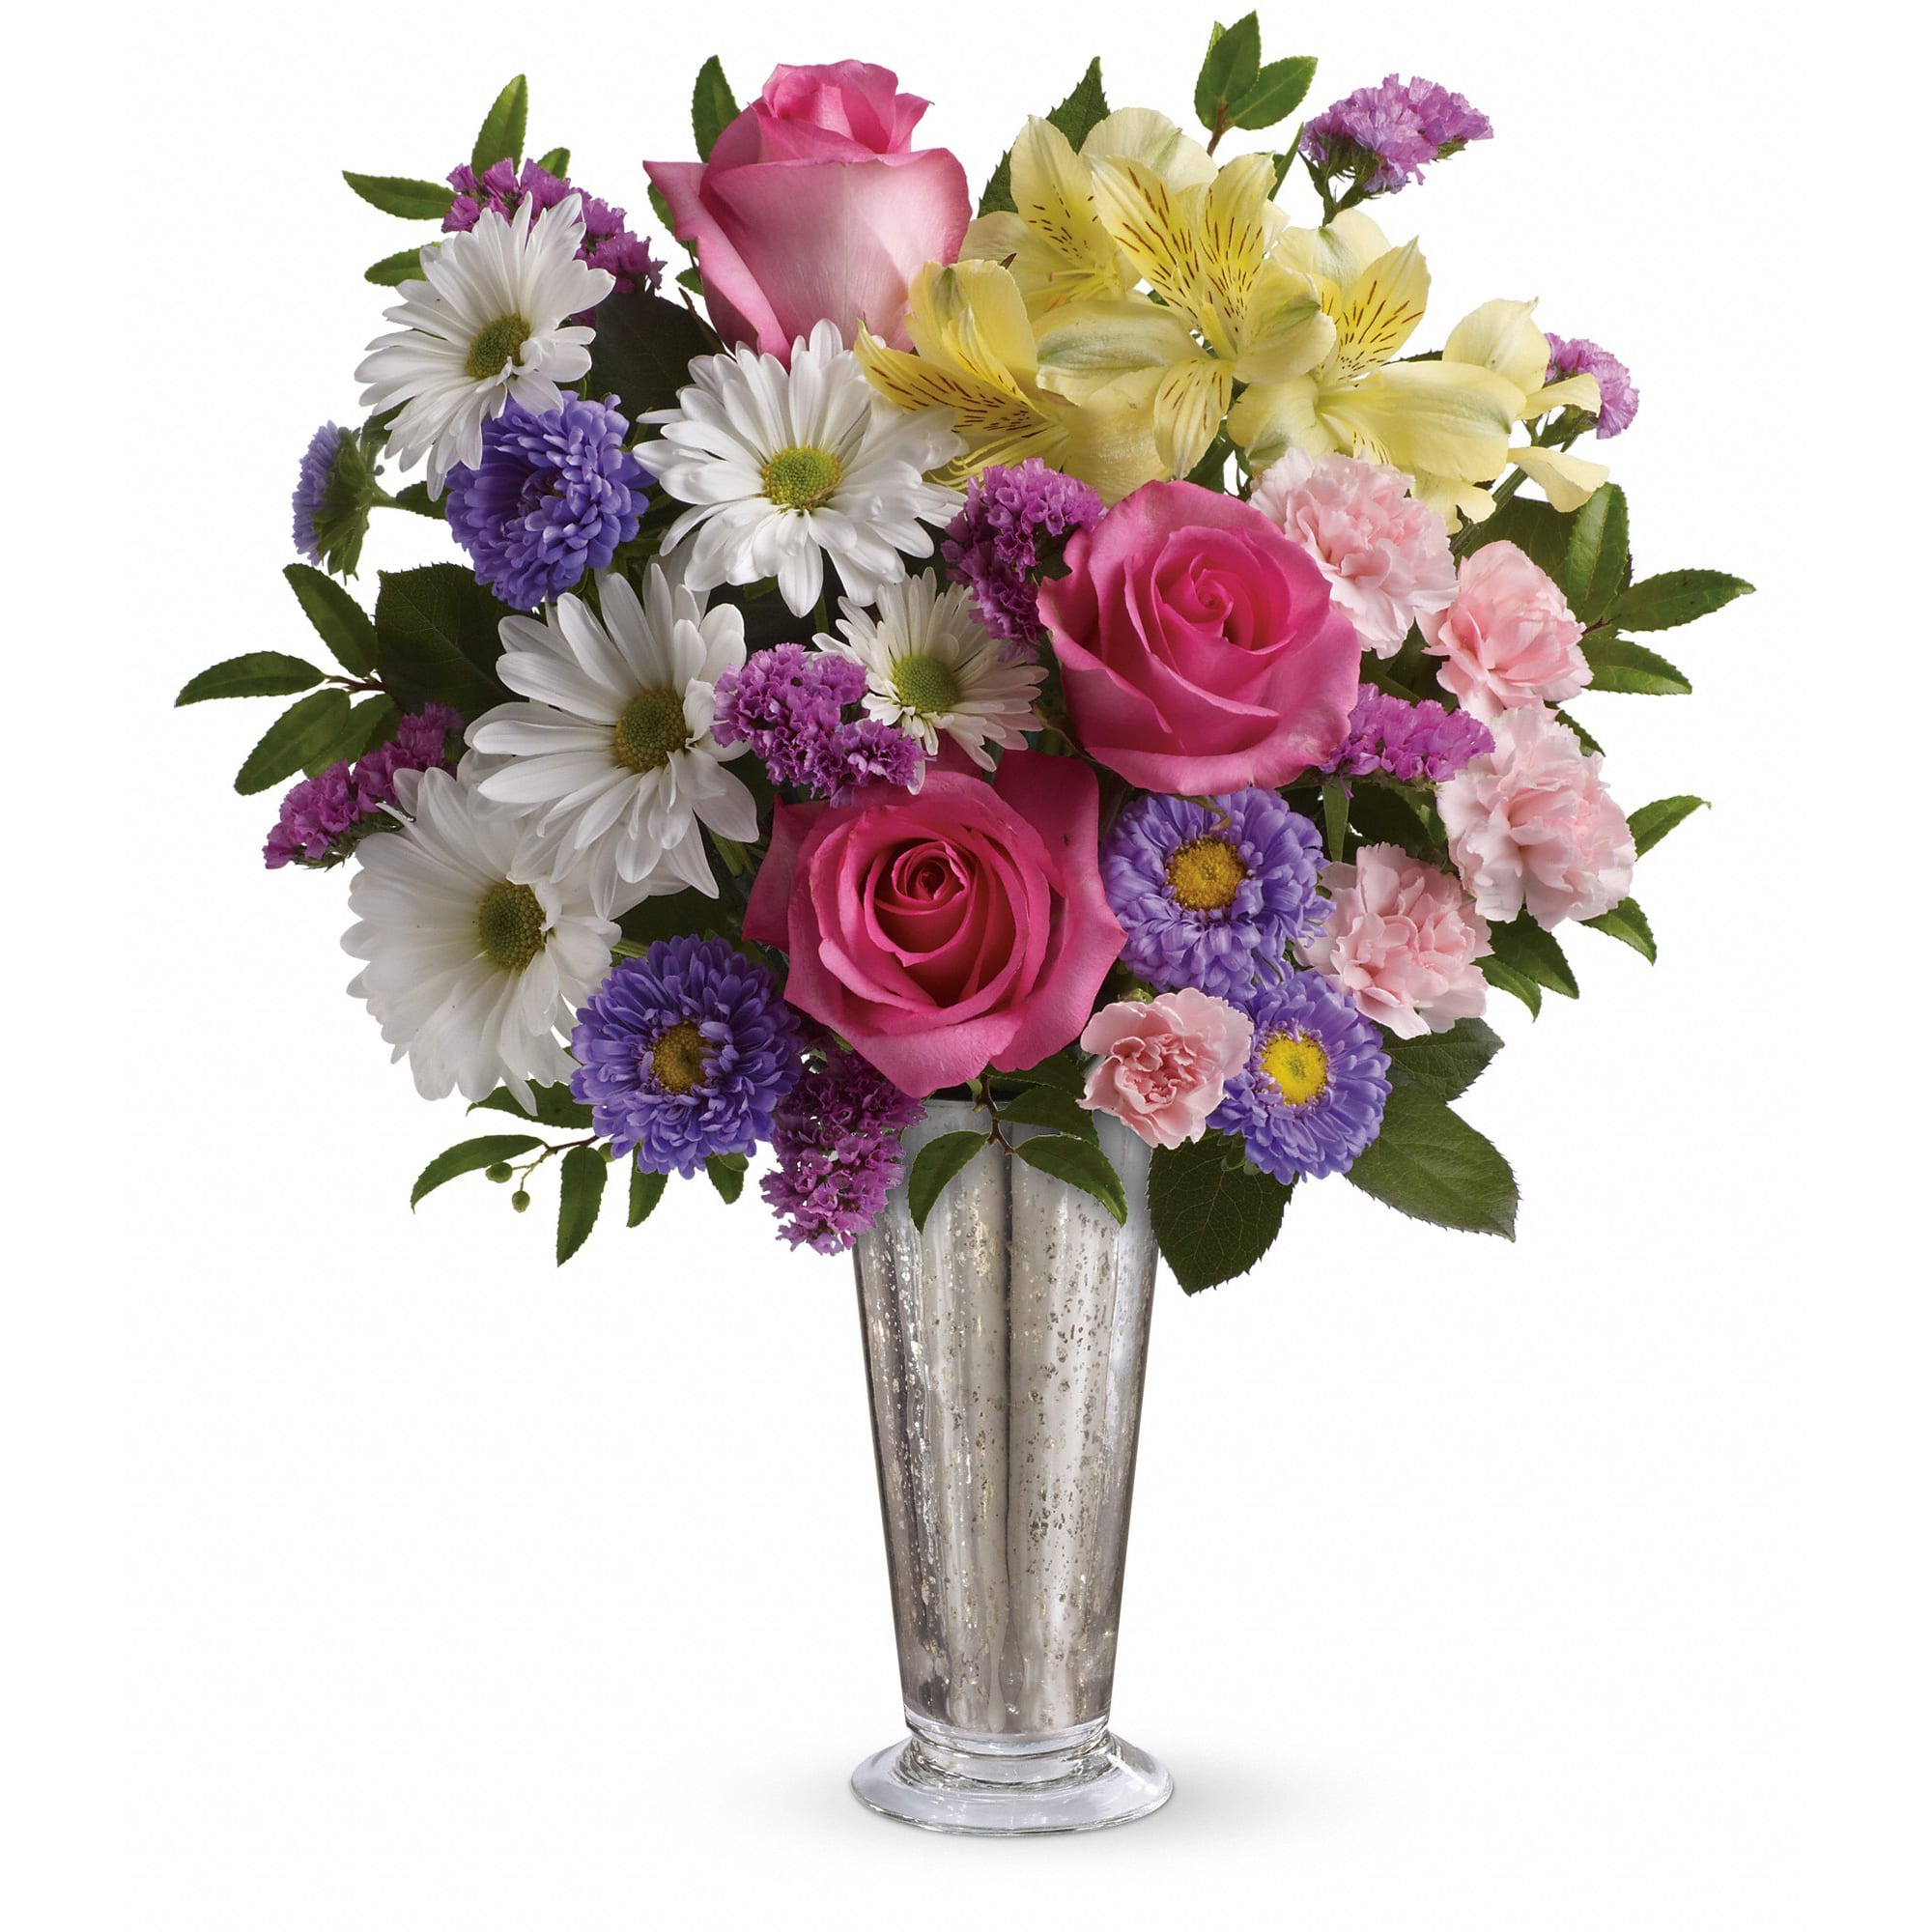 Smile and Shine Bouquet by Teleflora in Frederick, MD | Amour Flowers